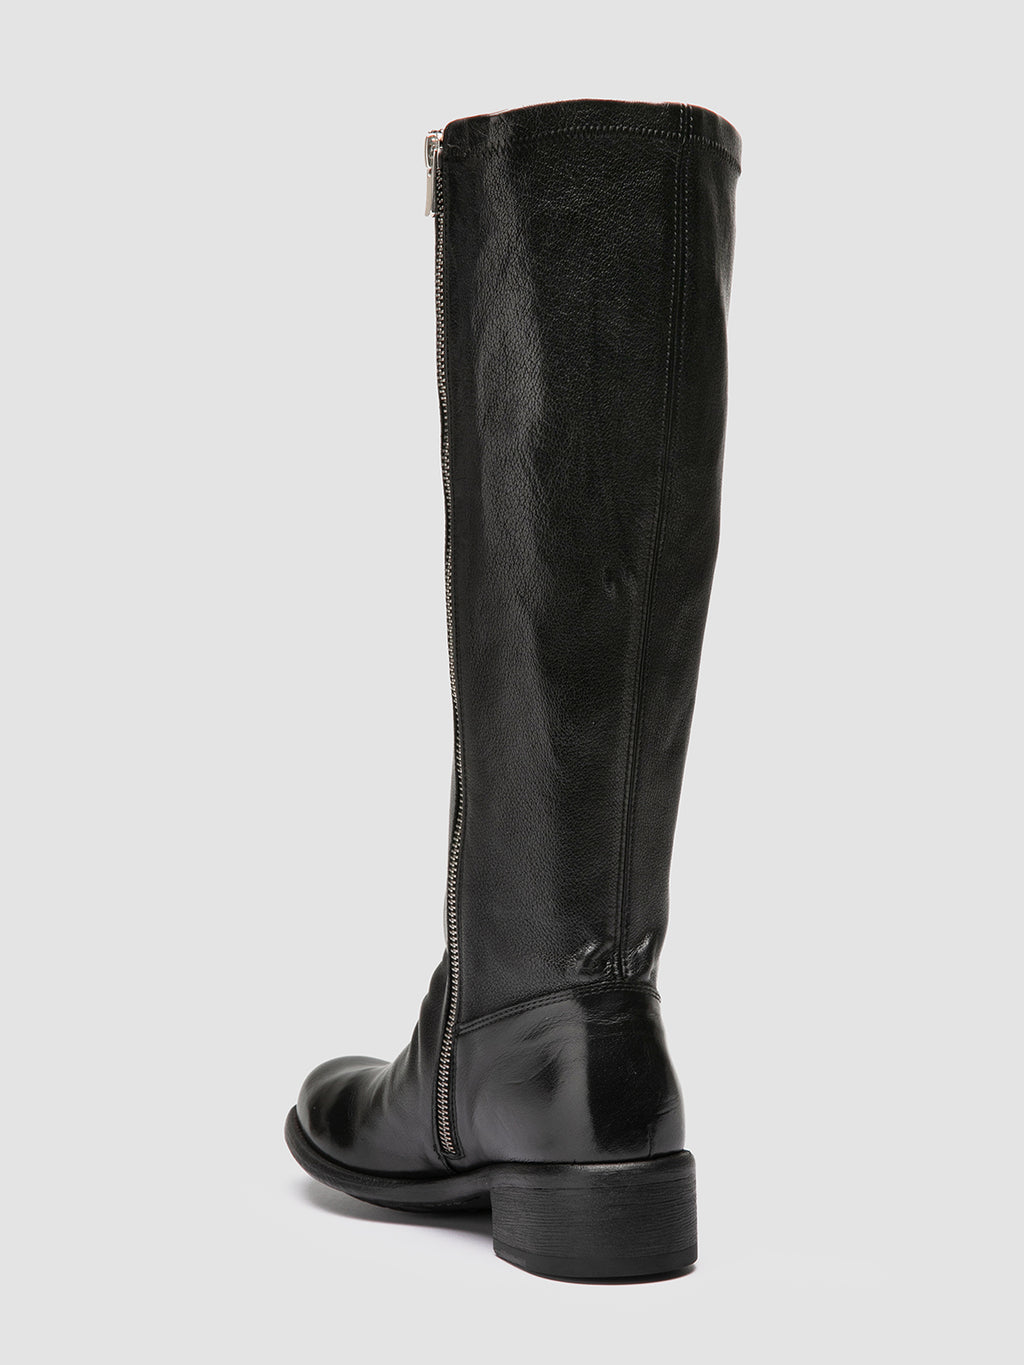 LIS 005 - Black Leather Zipped Boots